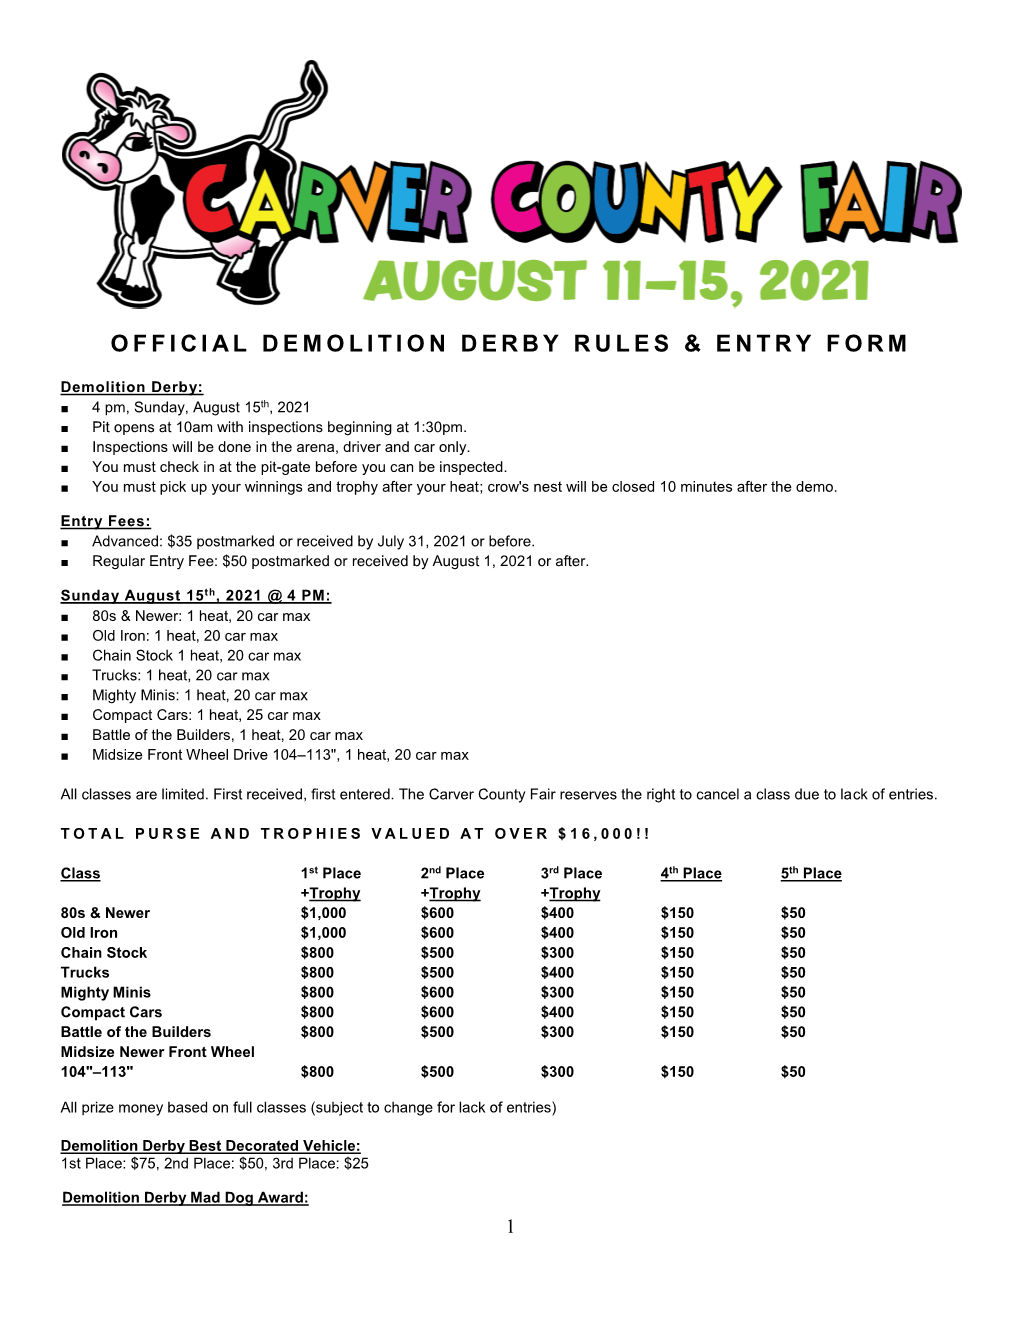 Demo Derby Rules & Entry Form